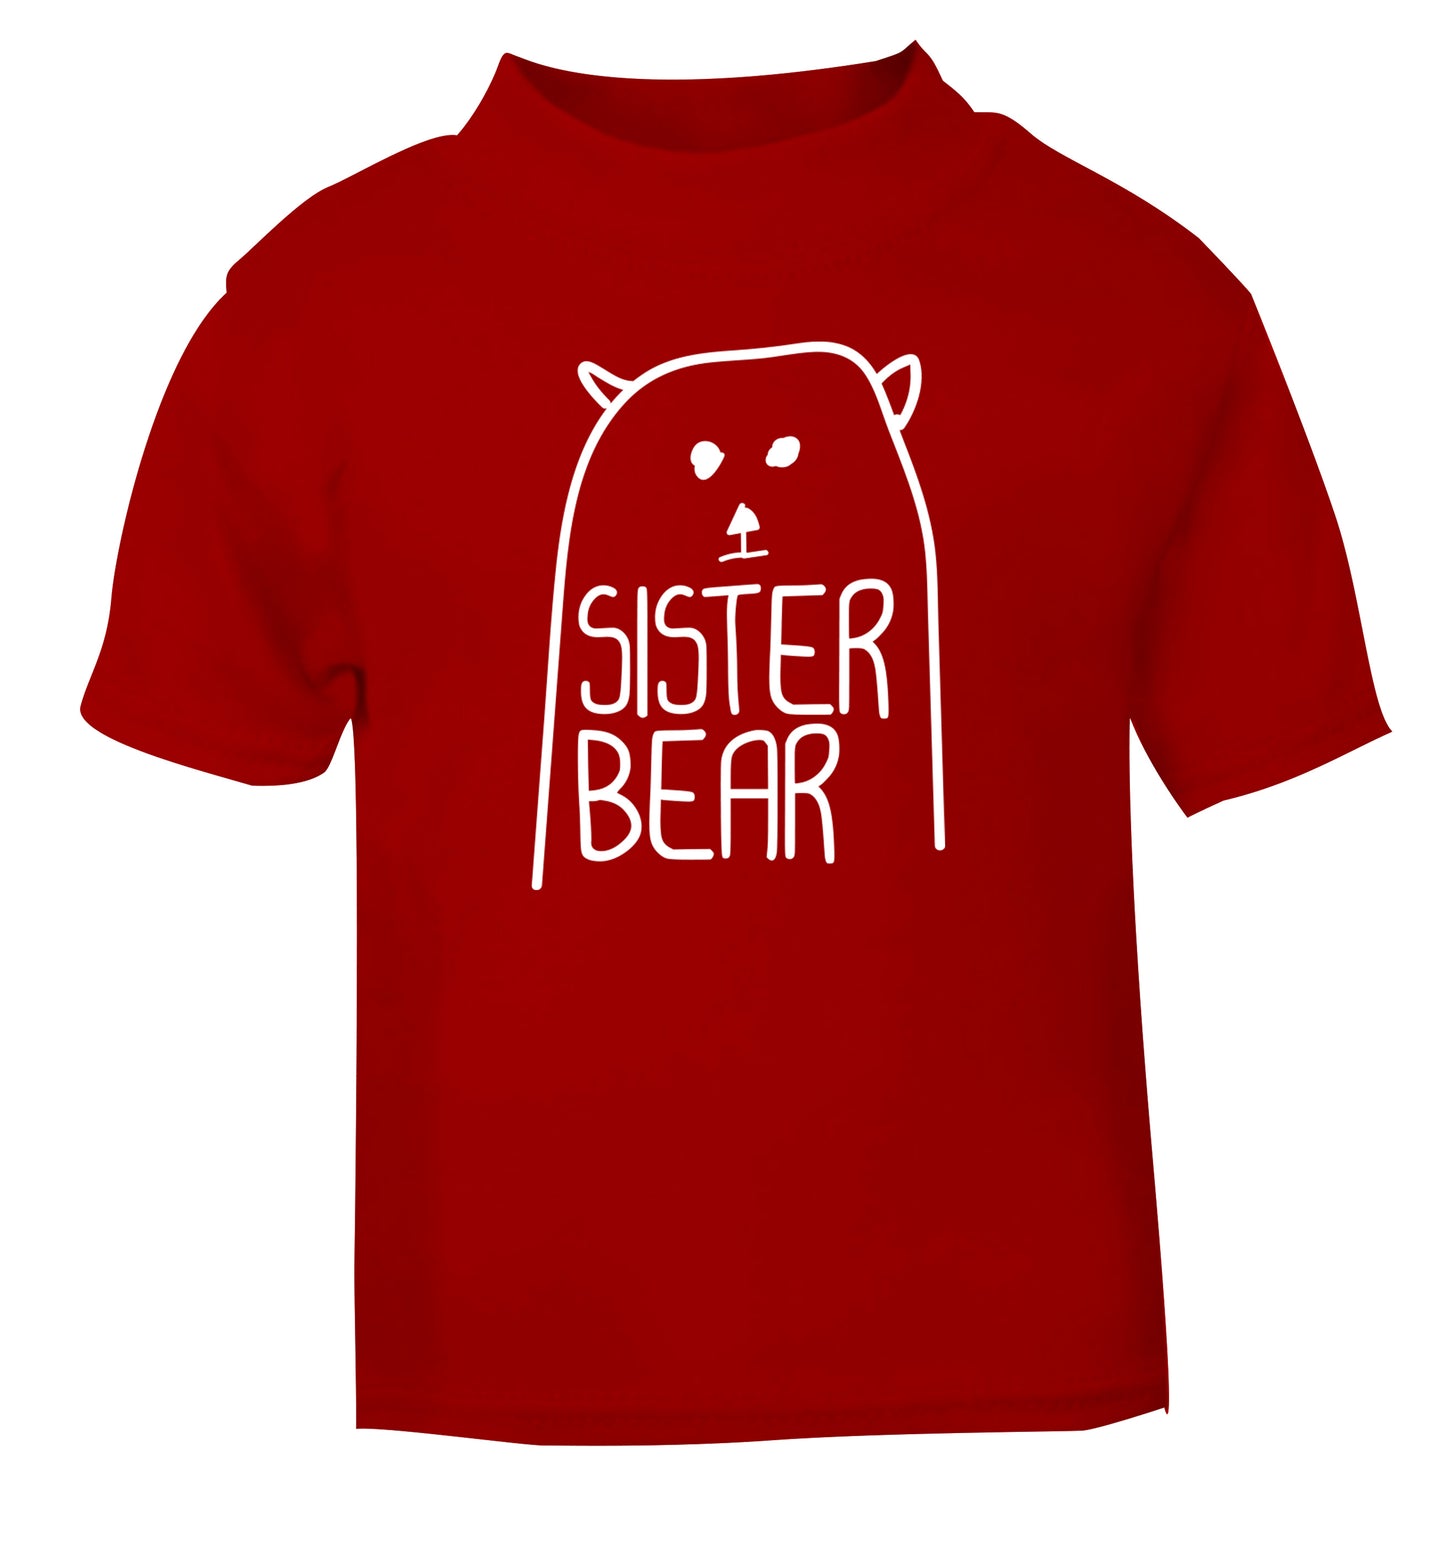 Sister bear red Baby Toddler Tshirt 2 Years